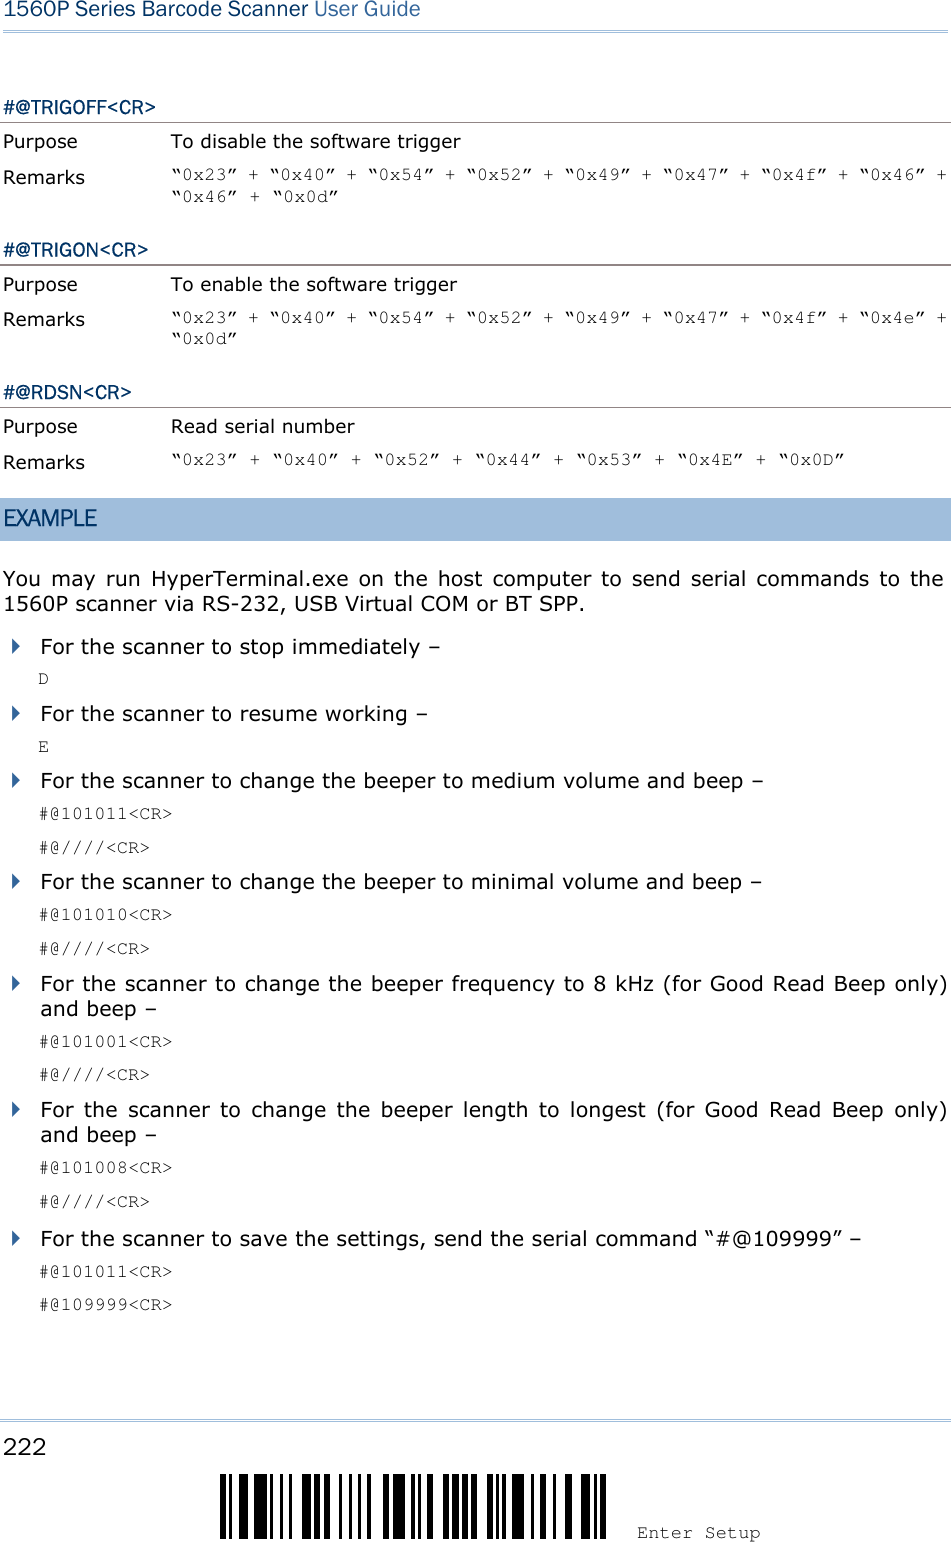 222 Enter Setup 1560P Series Barcode Scanner User Guide #@TRIGOFF&lt;CR&gt; Purpose  To disable the software trigger Remarks  “0x23” + “0x40” + “0x54” + “0x52” + “0x49” + “0x47” + “0x4f” + “0x46” + “0x46” + “0x0d” #@TRIGON&lt;CR&gt; Purpose  To enable the software trigger Remarks  “0x23” + “0x40” + “0x54” + “0x52” + “0x49” + “0x47” + “0x4f” + “0x4e” + “0x0d” #@RDSN&lt;CR&gt; Purpose  Read serial number Remarks  “0x23” + “0x40” + “0x52” + “0x44” + “0x53” + “0x4E” + “0x0D” EXAMPLE You may run  HyperTerminal.exe  on  the  host  computer  to  send serial commands to the 1560P scanner via RS-232, USB Virtual COM or BT SPP. For the scanner to stop immediately –DFor the scanner to resume working –EFor the scanner to change the beeper to medium volume and beep –#@101011&lt;CR&gt;#@////&lt;CR&gt;For the scanner to change the beeper to minimal volume and beep –#@101010&lt;CR&gt;#@////&lt;CR&gt;For the scanner to change the beeper frequency to 8 kHz (for Good Read Beep only)and beep –#@101001&lt;CR&gt;#@////&lt;CR&gt;For  the  scanner  to  change  the  beeper  length  to  longest  (for  Good  Read  Beep  only)and beep –#@101008&lt;CR&gt;#@////&lt;CR&gt;For the scanner to save the settings, send the serial command “#@109999” –#@101011&lt;CR&gt;#@109999&lt;CR&gt;